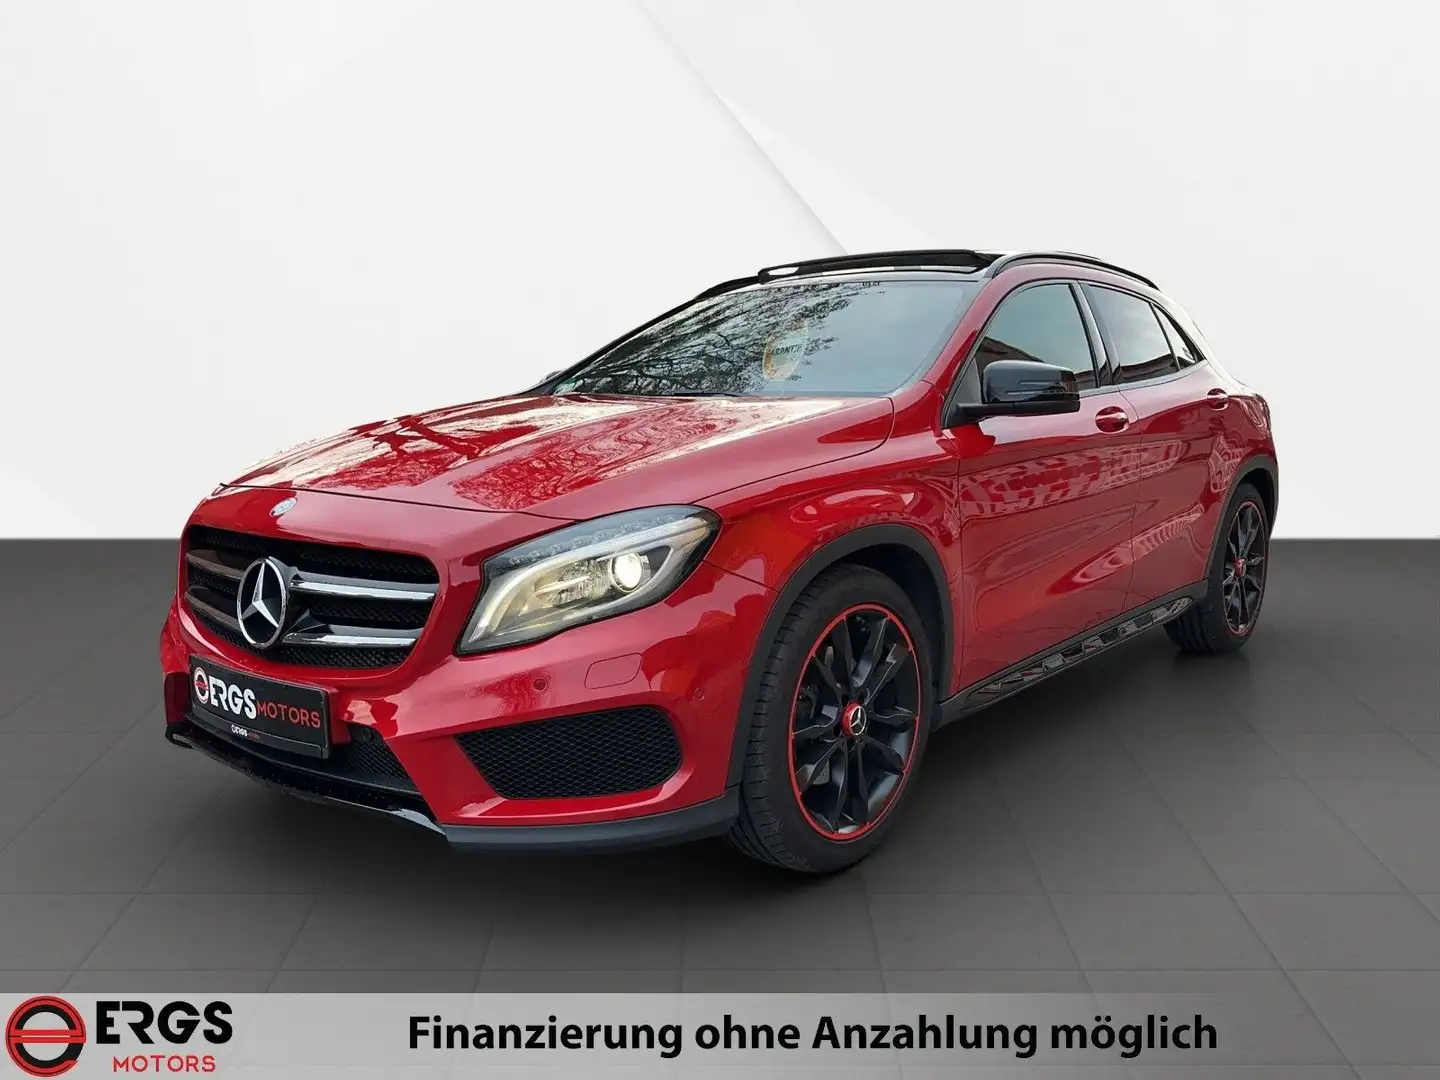 Mercedes-Benz GLA 250 4Matic AMG Line "Pano,erst49tkm,Xenon" Red - 1